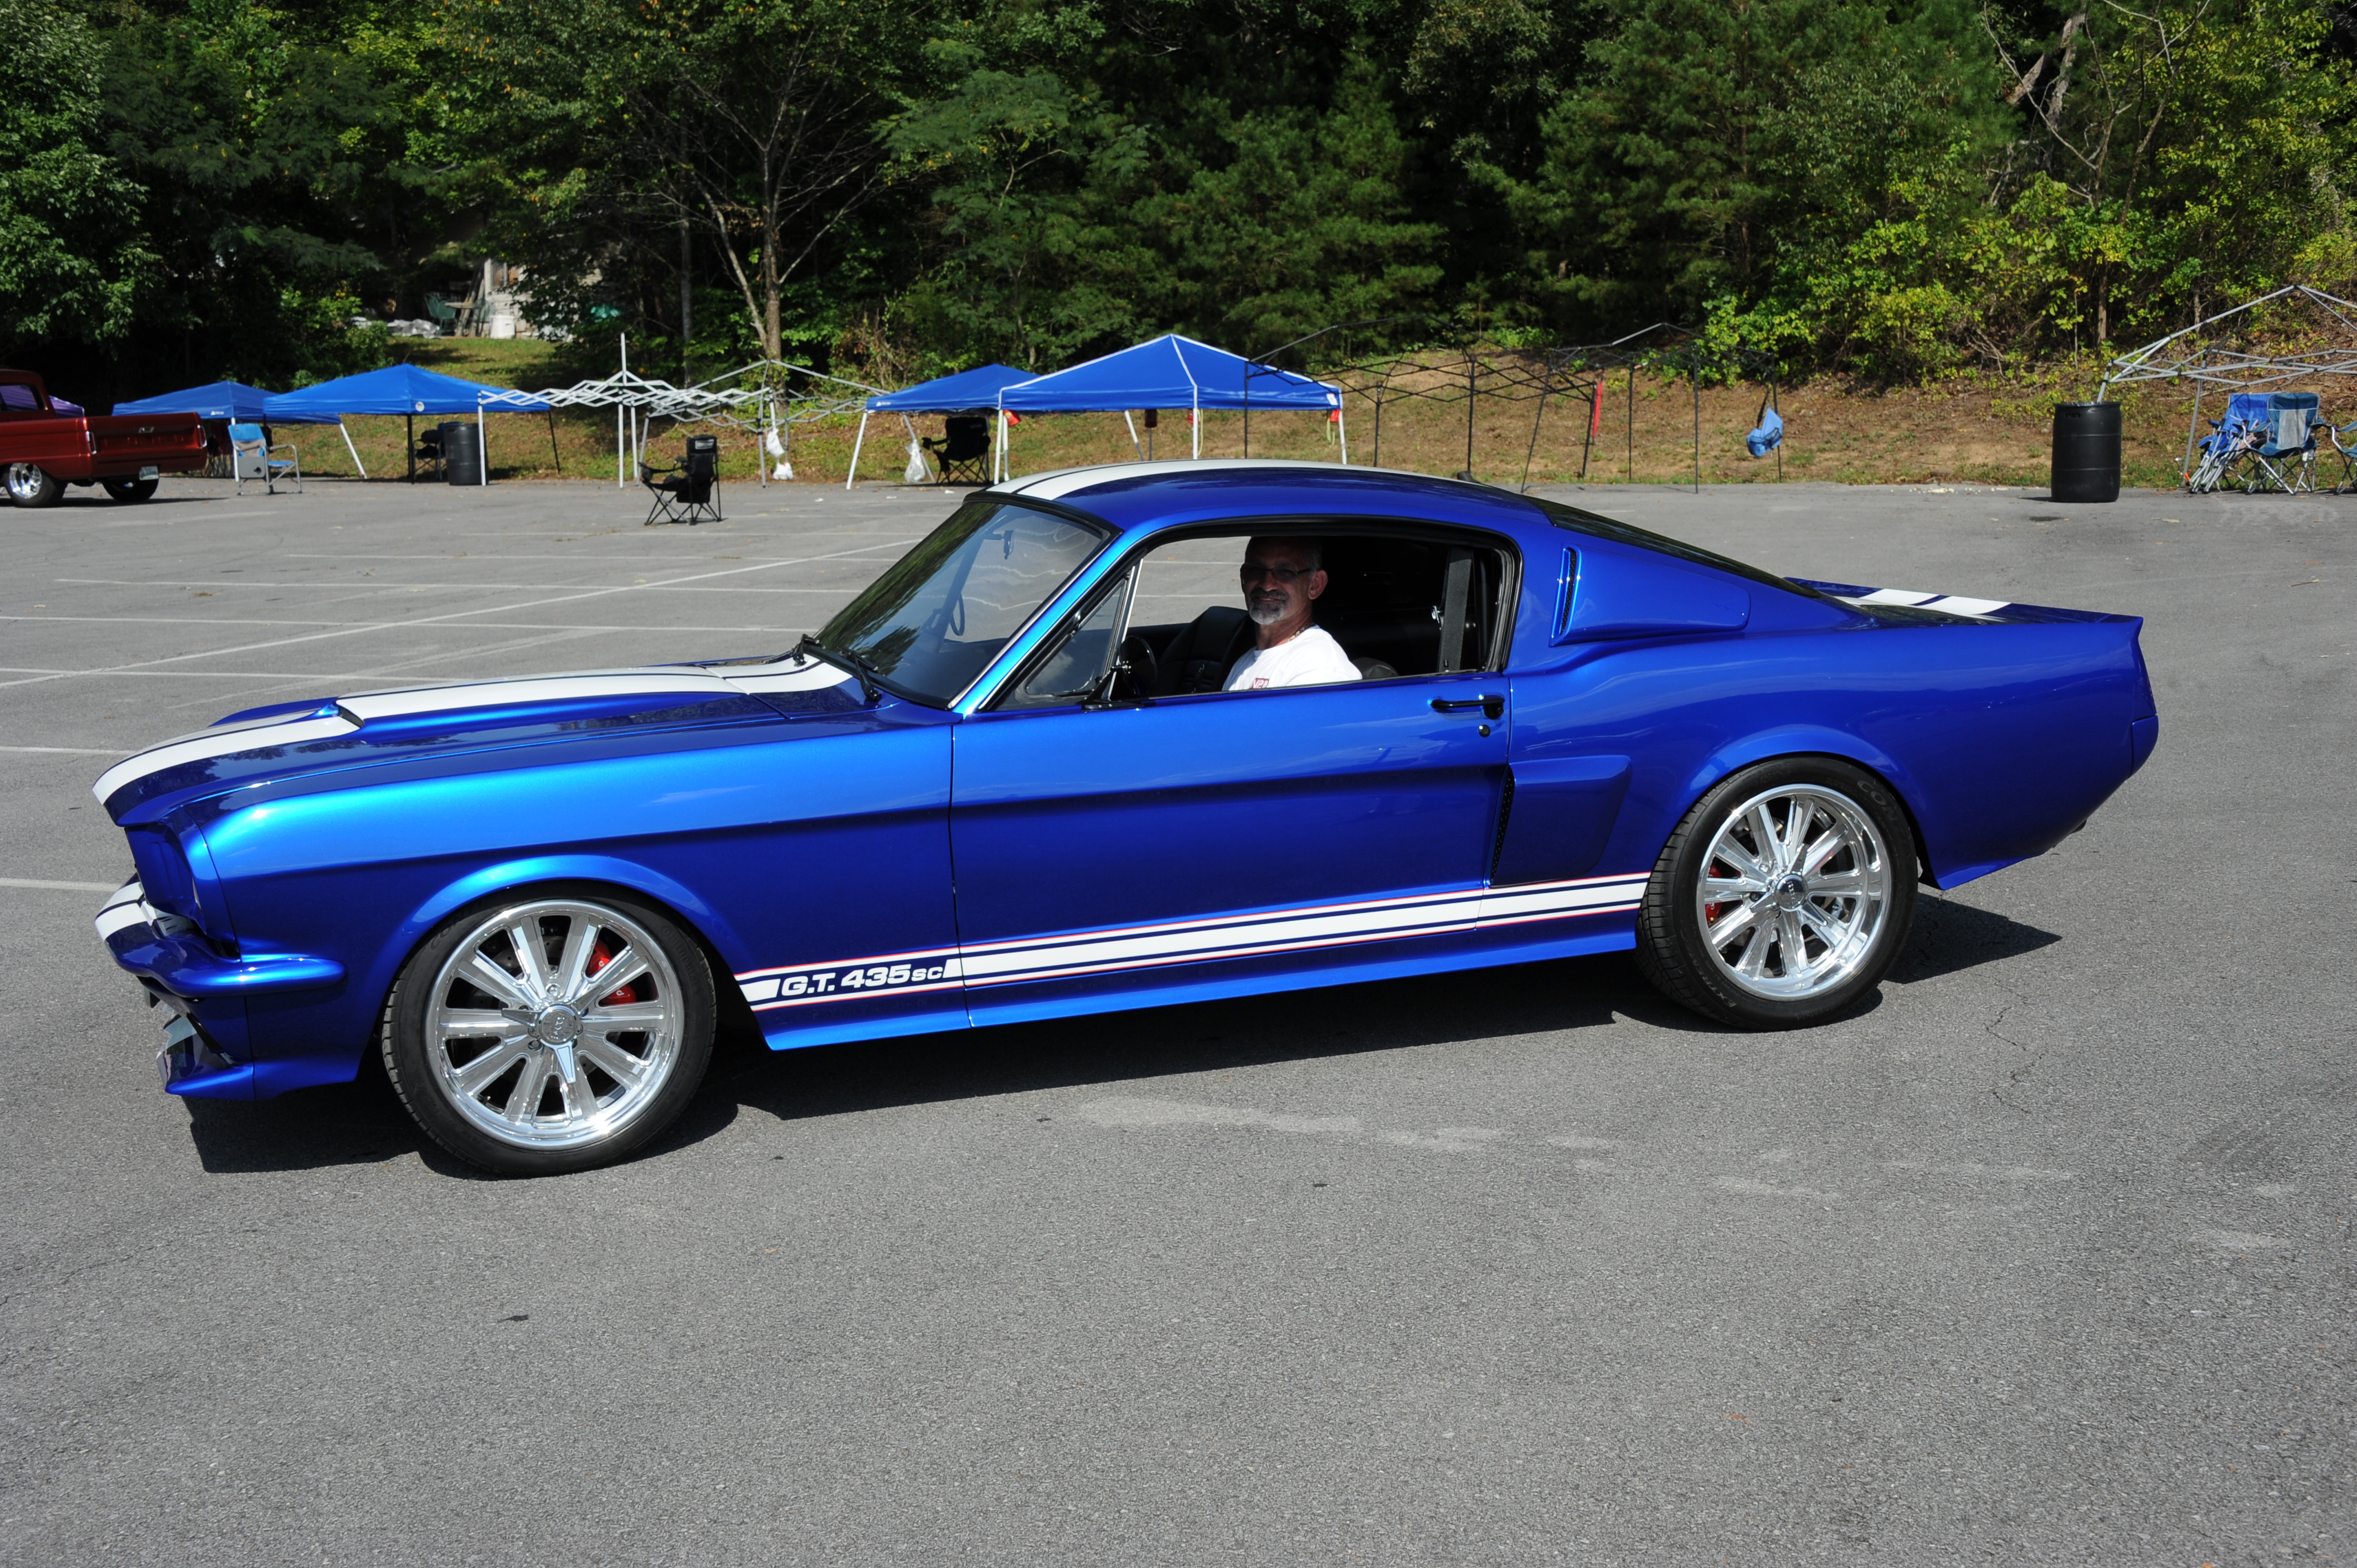 Steve Hines - '66 Ford Mustang - Shades of the Past, Pigeon Forge